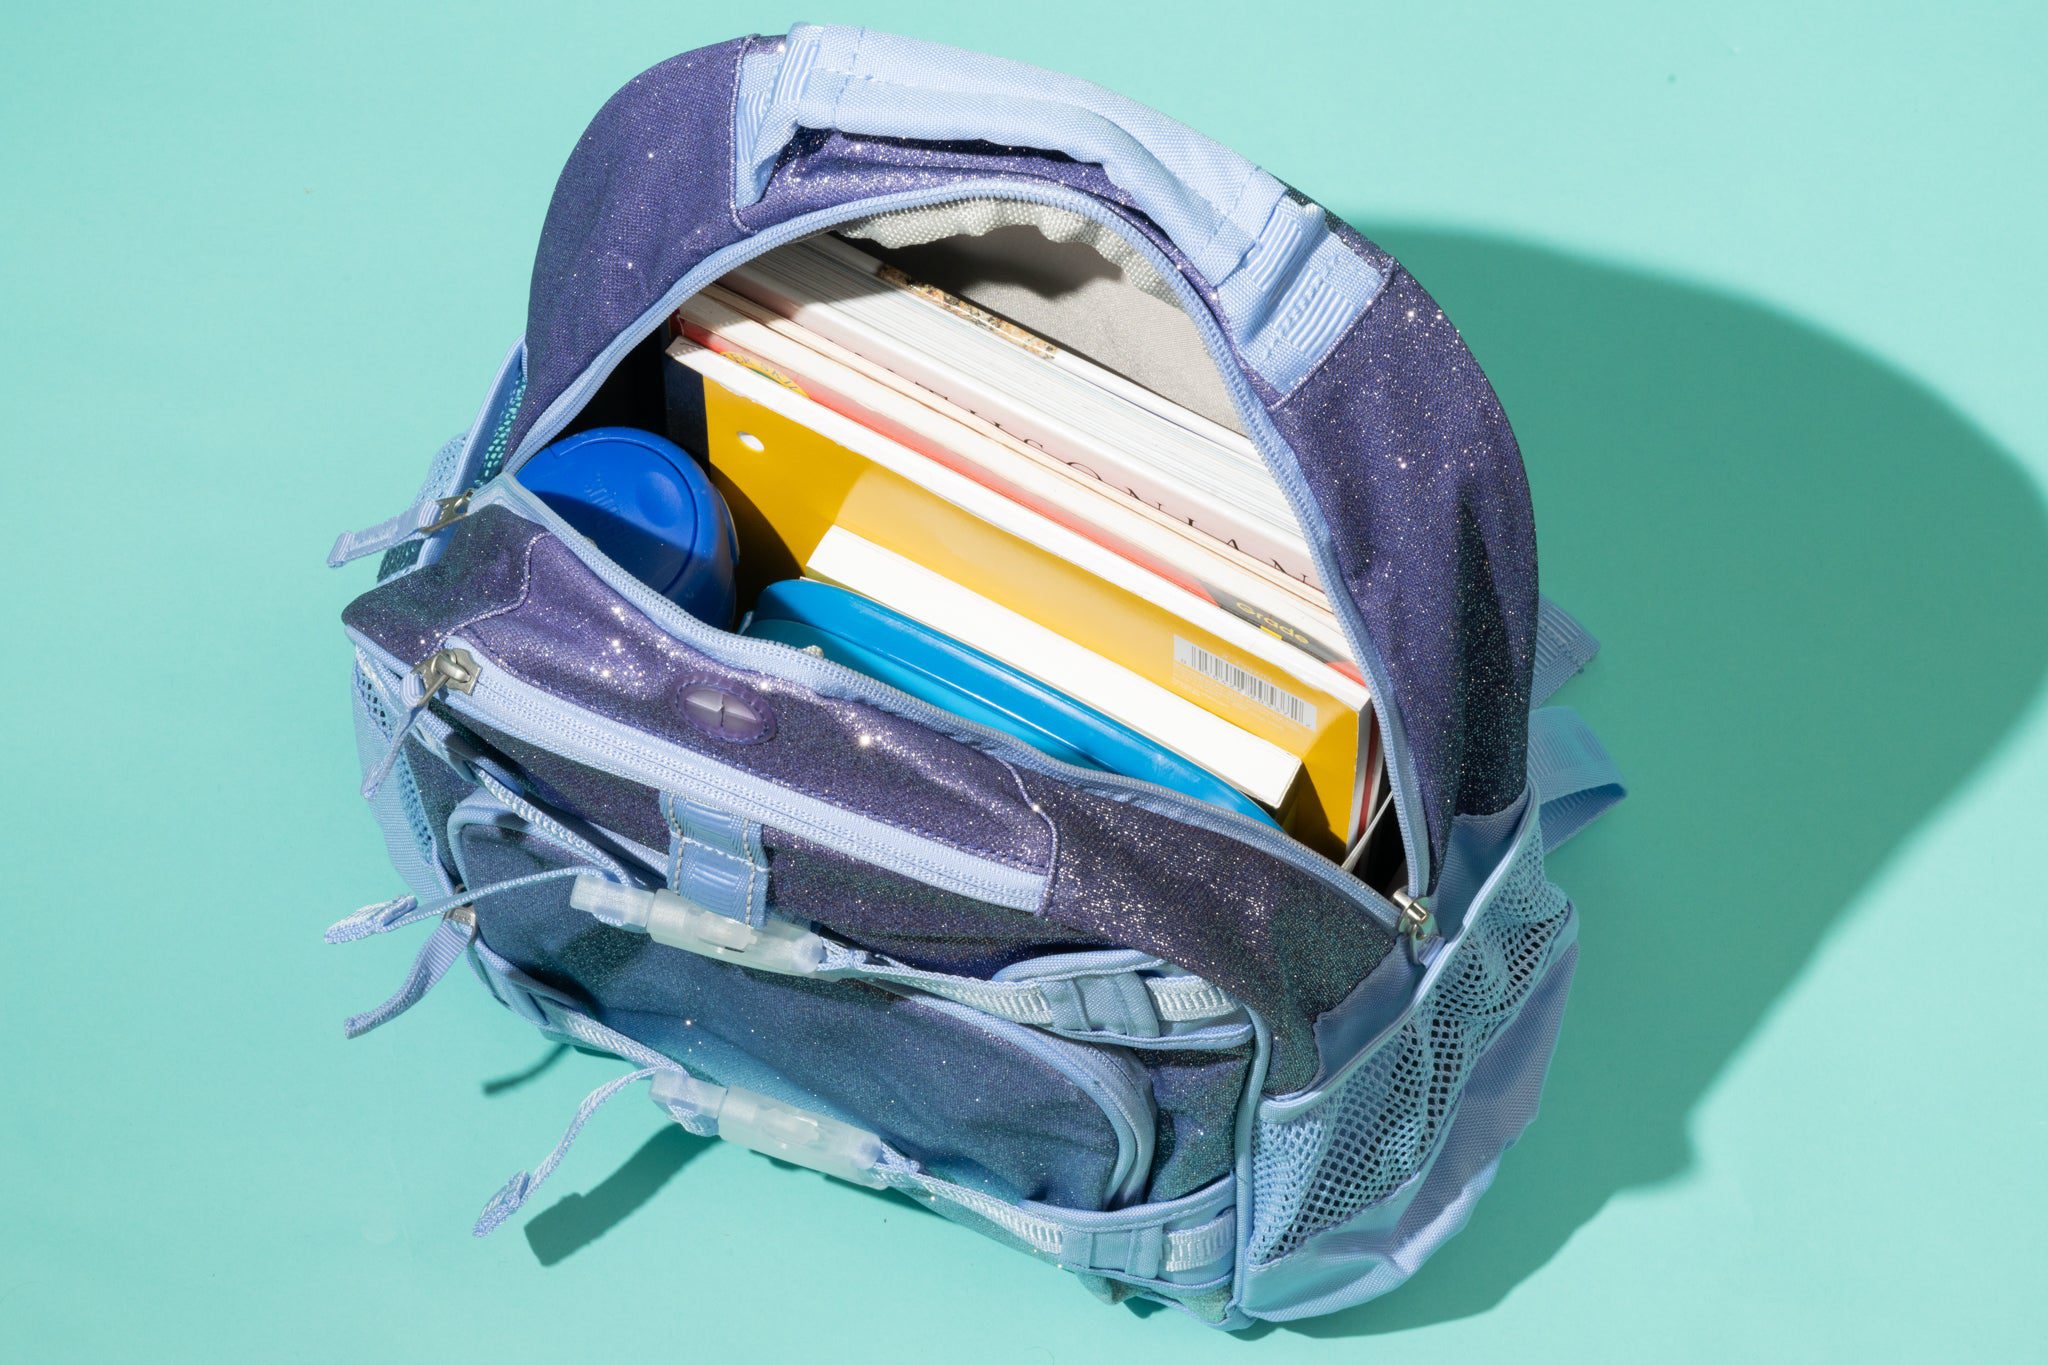 The backpack is loaded with books.